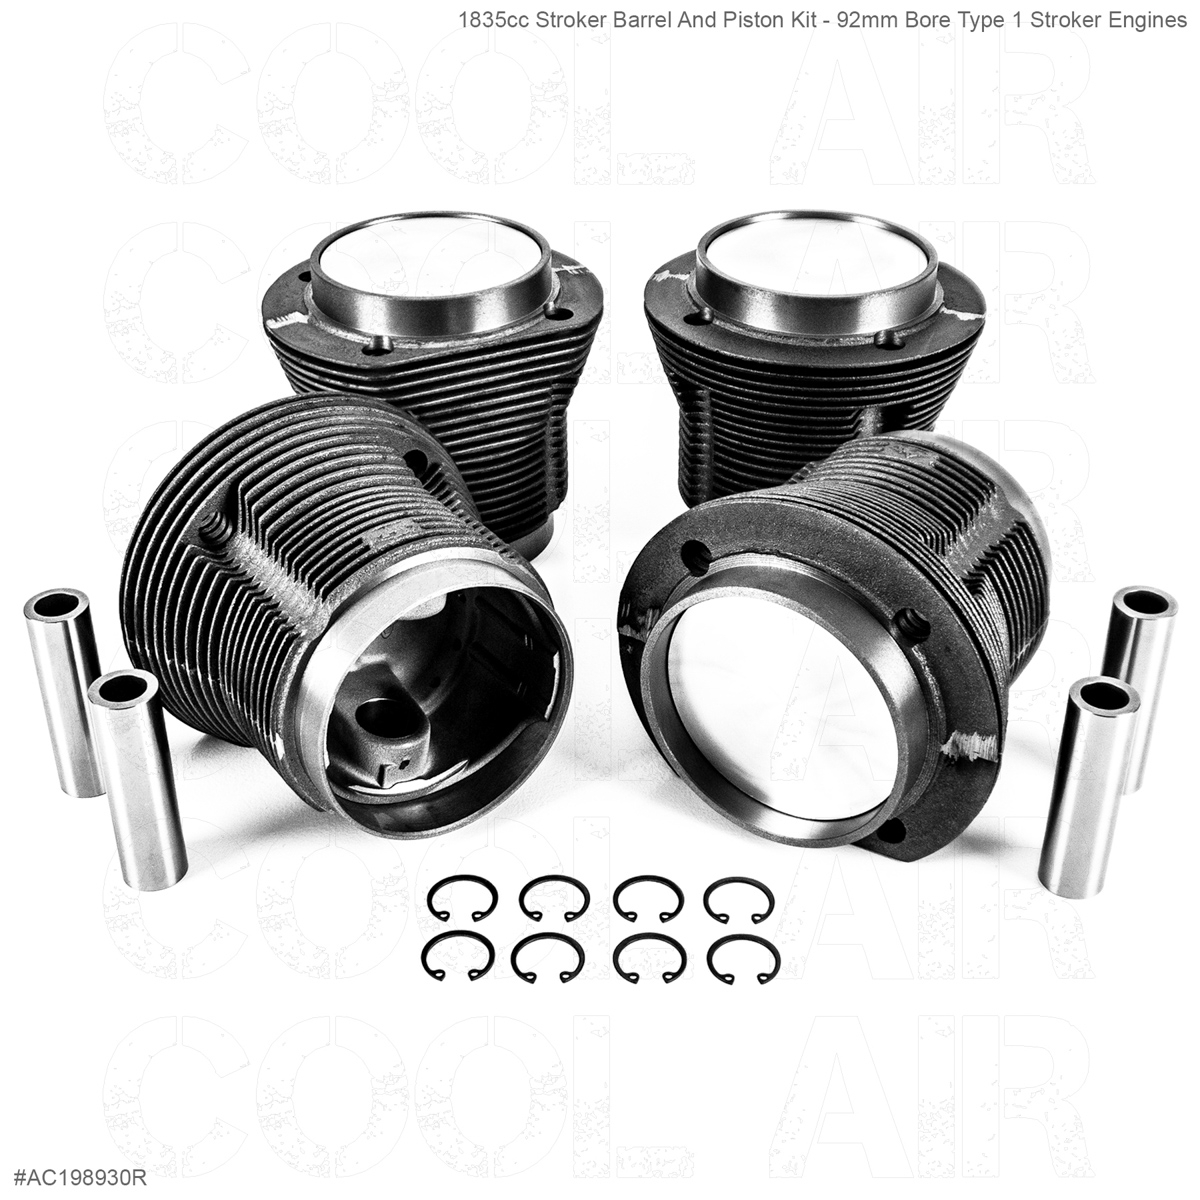 *ON SALE* 1835cc Stroker Barrel And Piston Kit - 92mm Bore Type 1 Stroker Engines